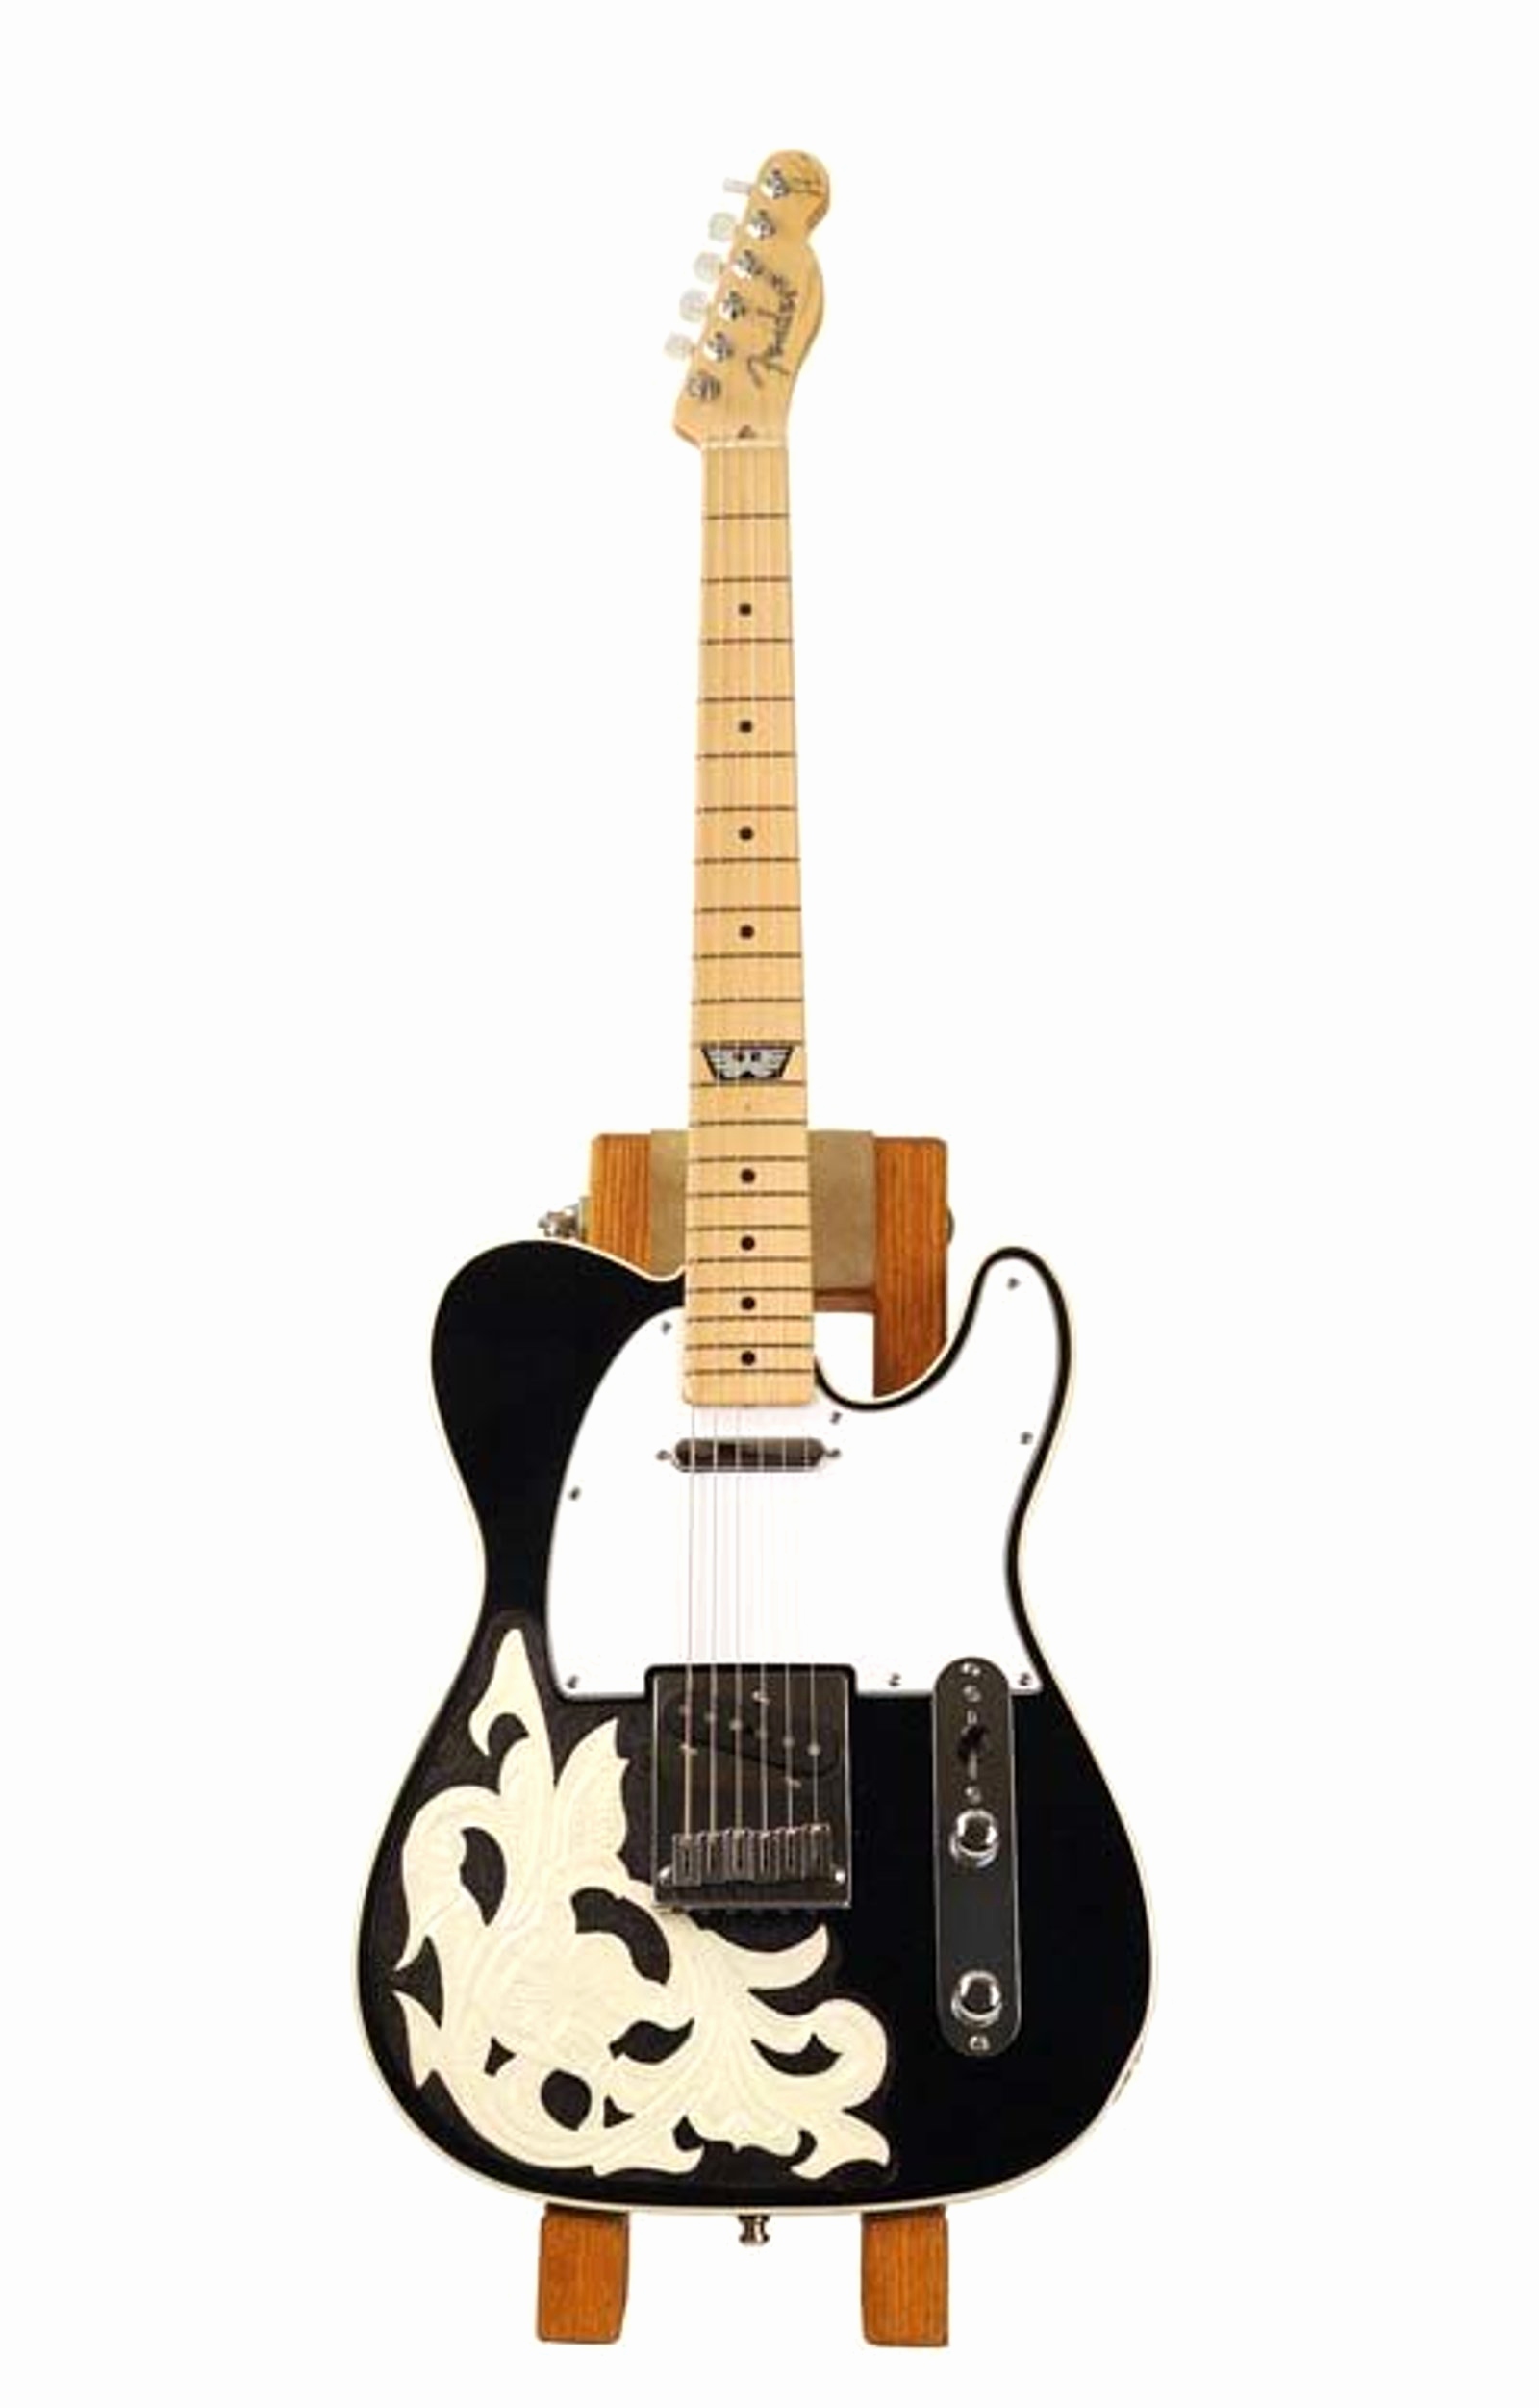 Telecaster Drawing at GetDrawings.com | Free for personal ... fender tele wiring diagram free download schematic 